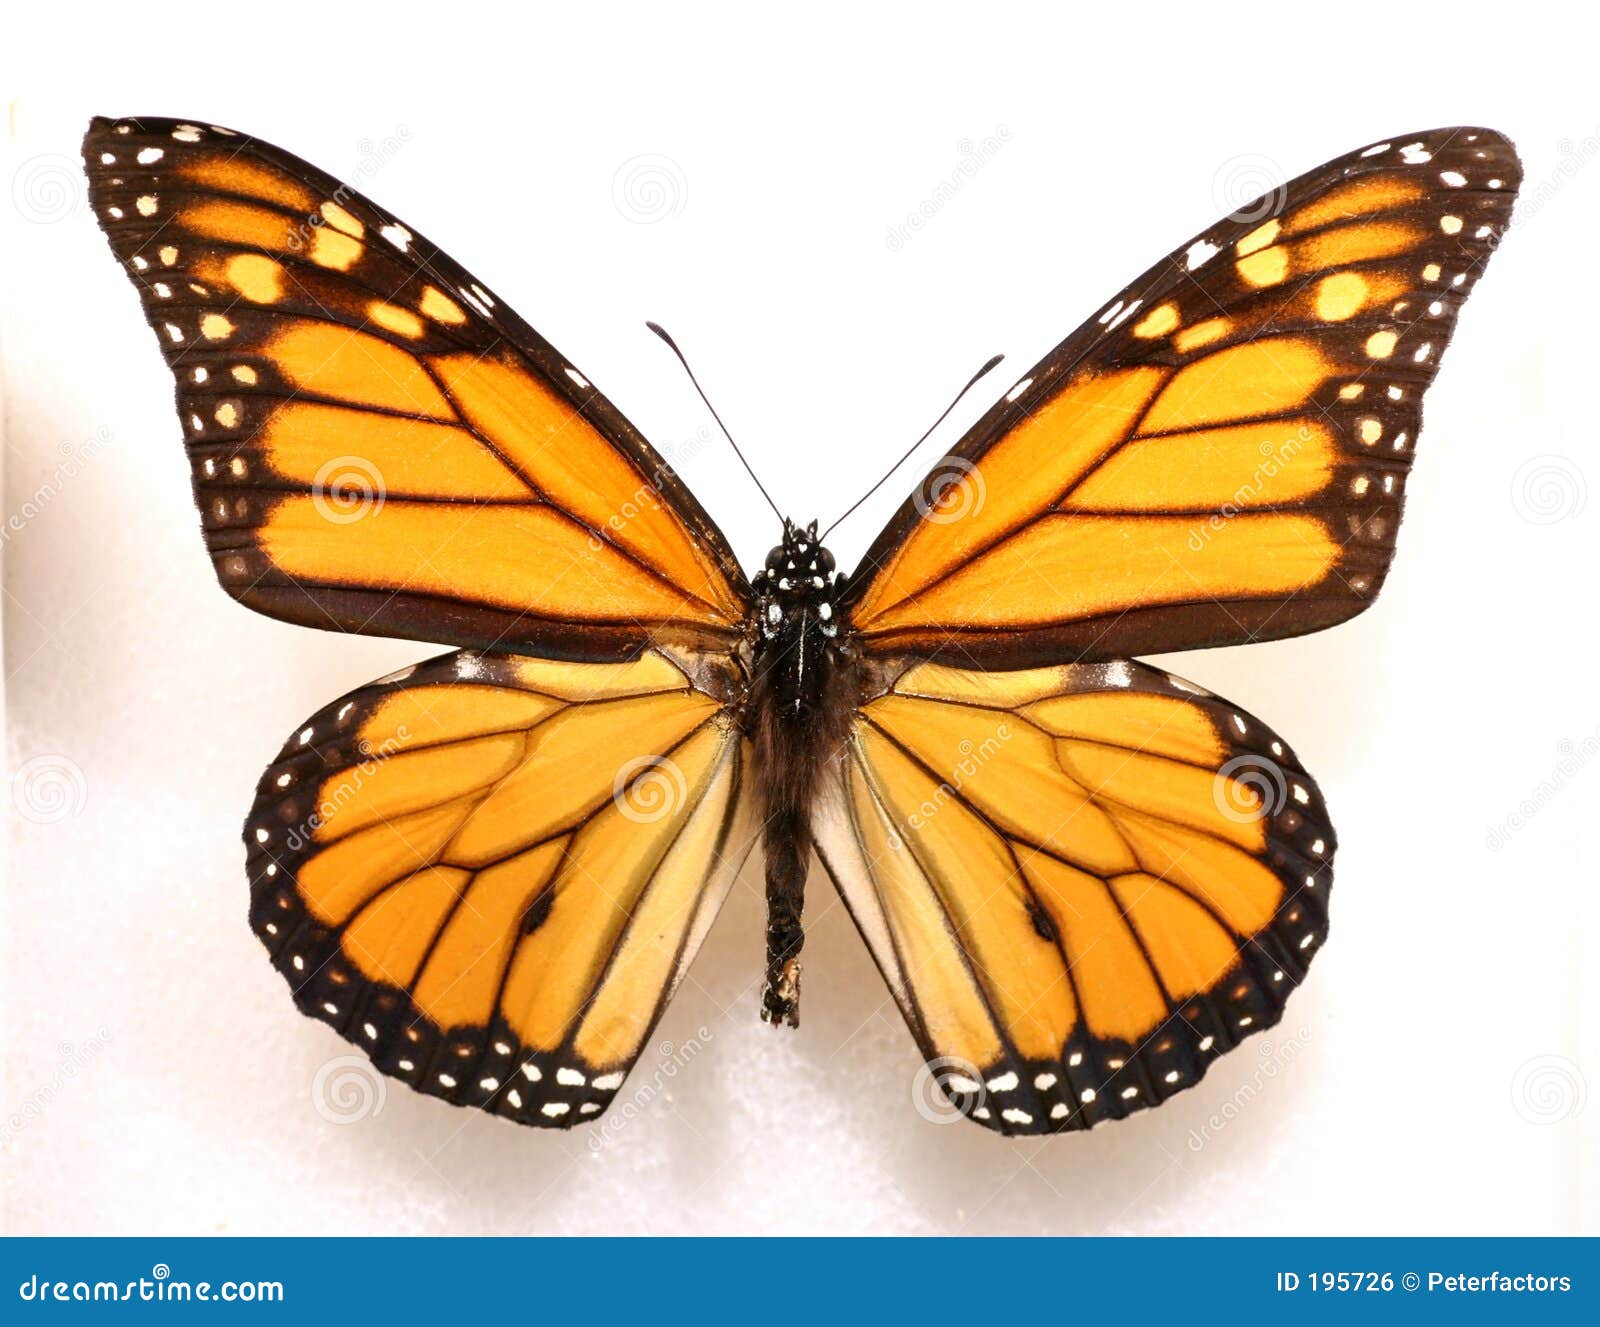 Monarch Butterfly Royalty Free Stock Image - Image: 195726